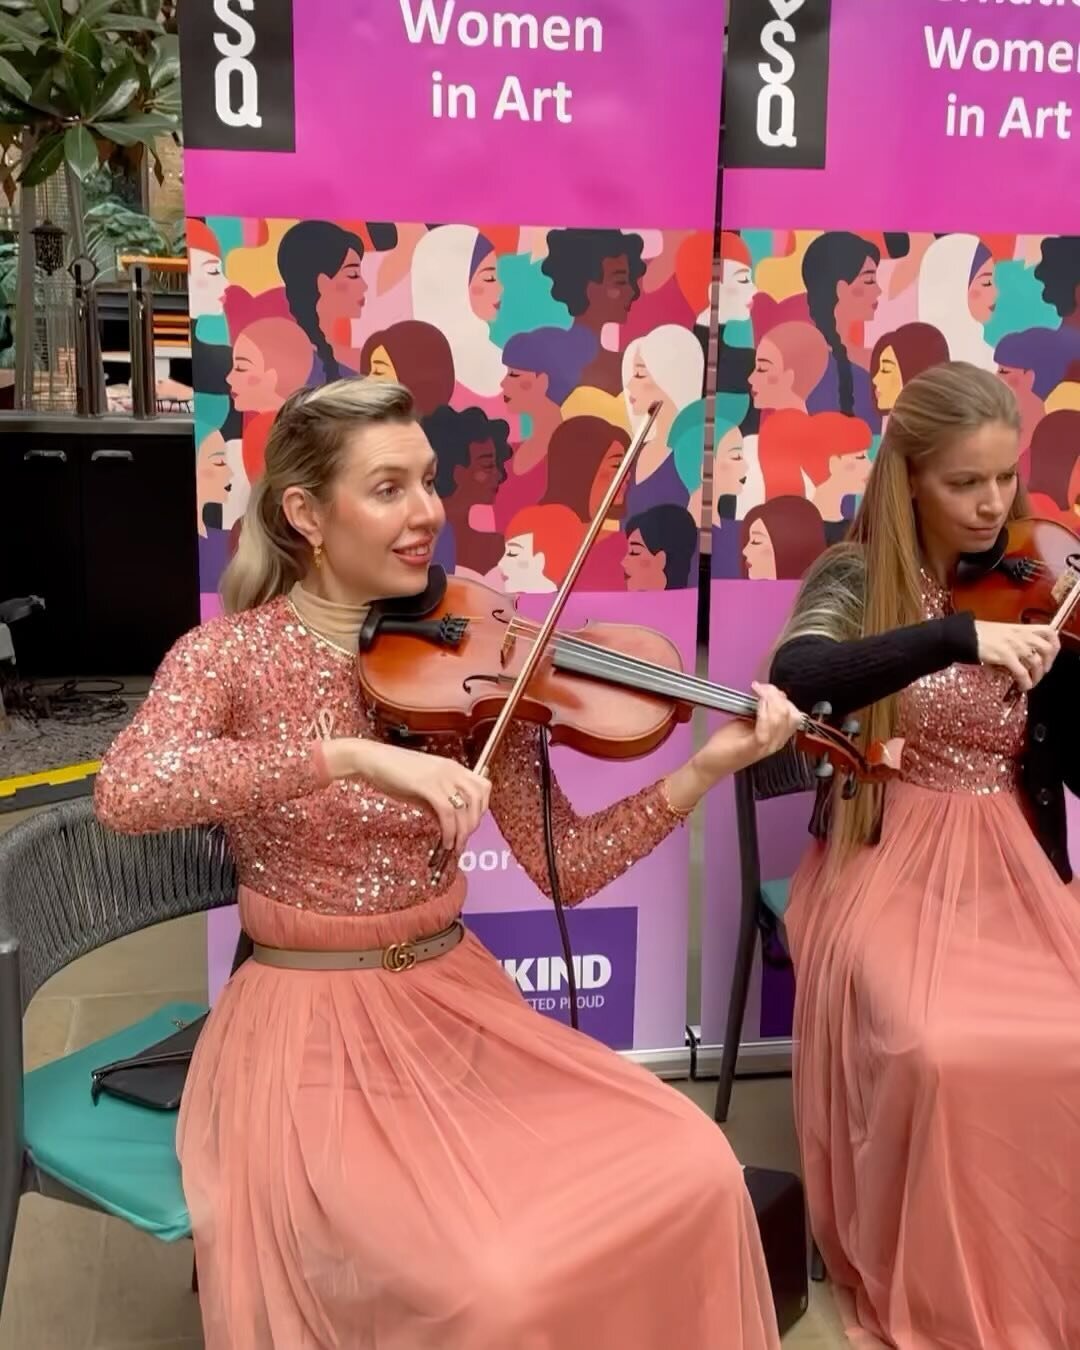 We had a wonderful time on International Women&rsquo;s Day at @dsq_london for their International Women in Art event. 
Thank you for supporting women in art and for having us performing 💜

#stringquartet #womeninart #womensupportingwomen #womensday 